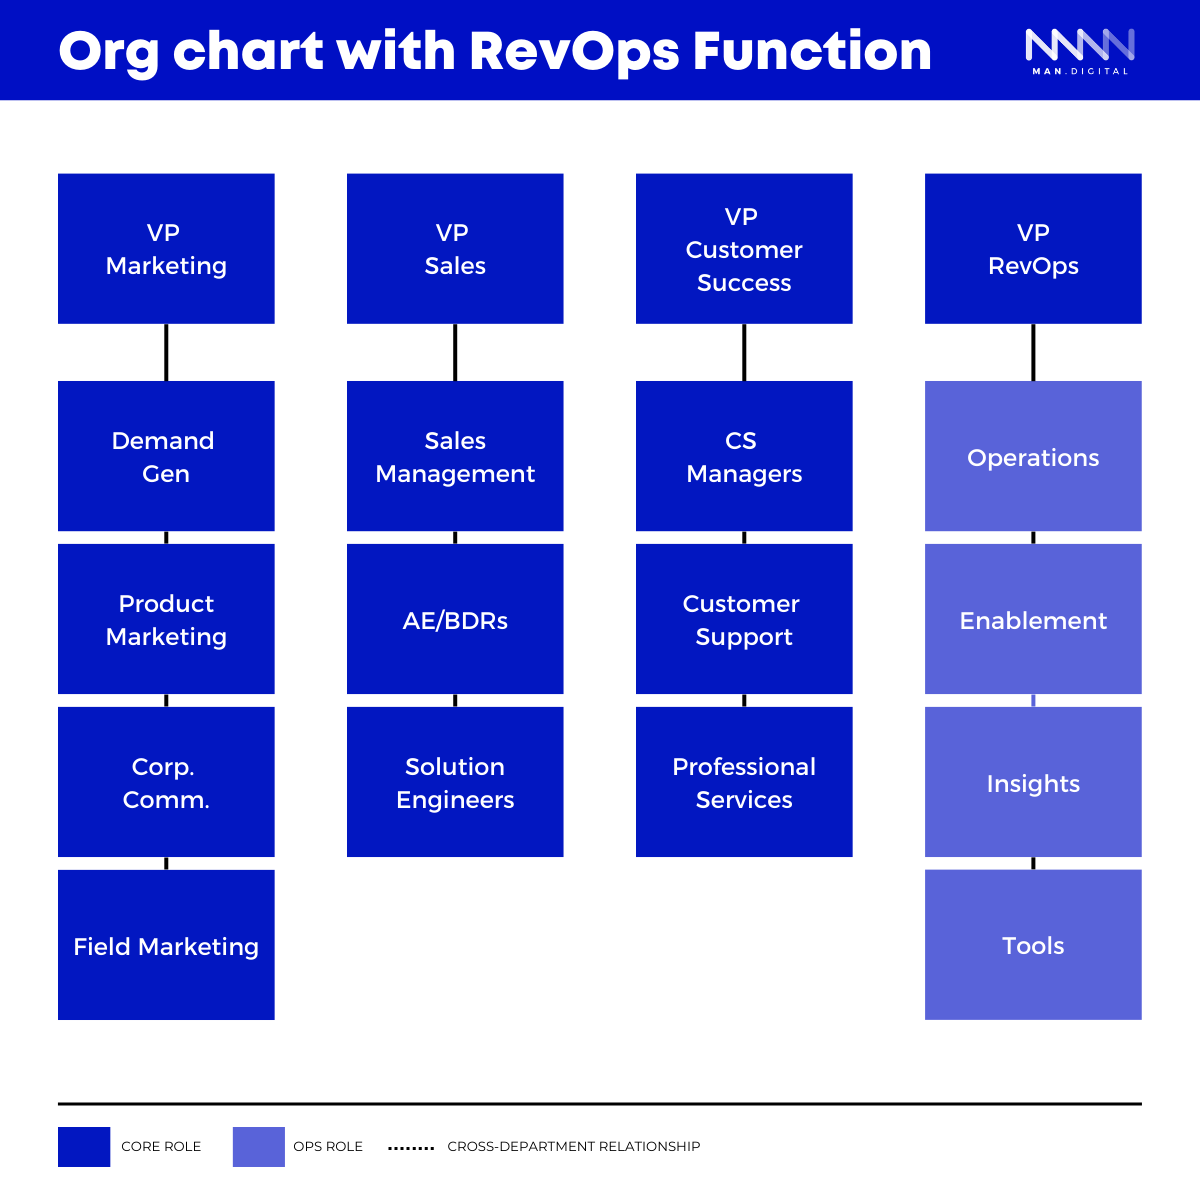 Org chart with RevOps Function